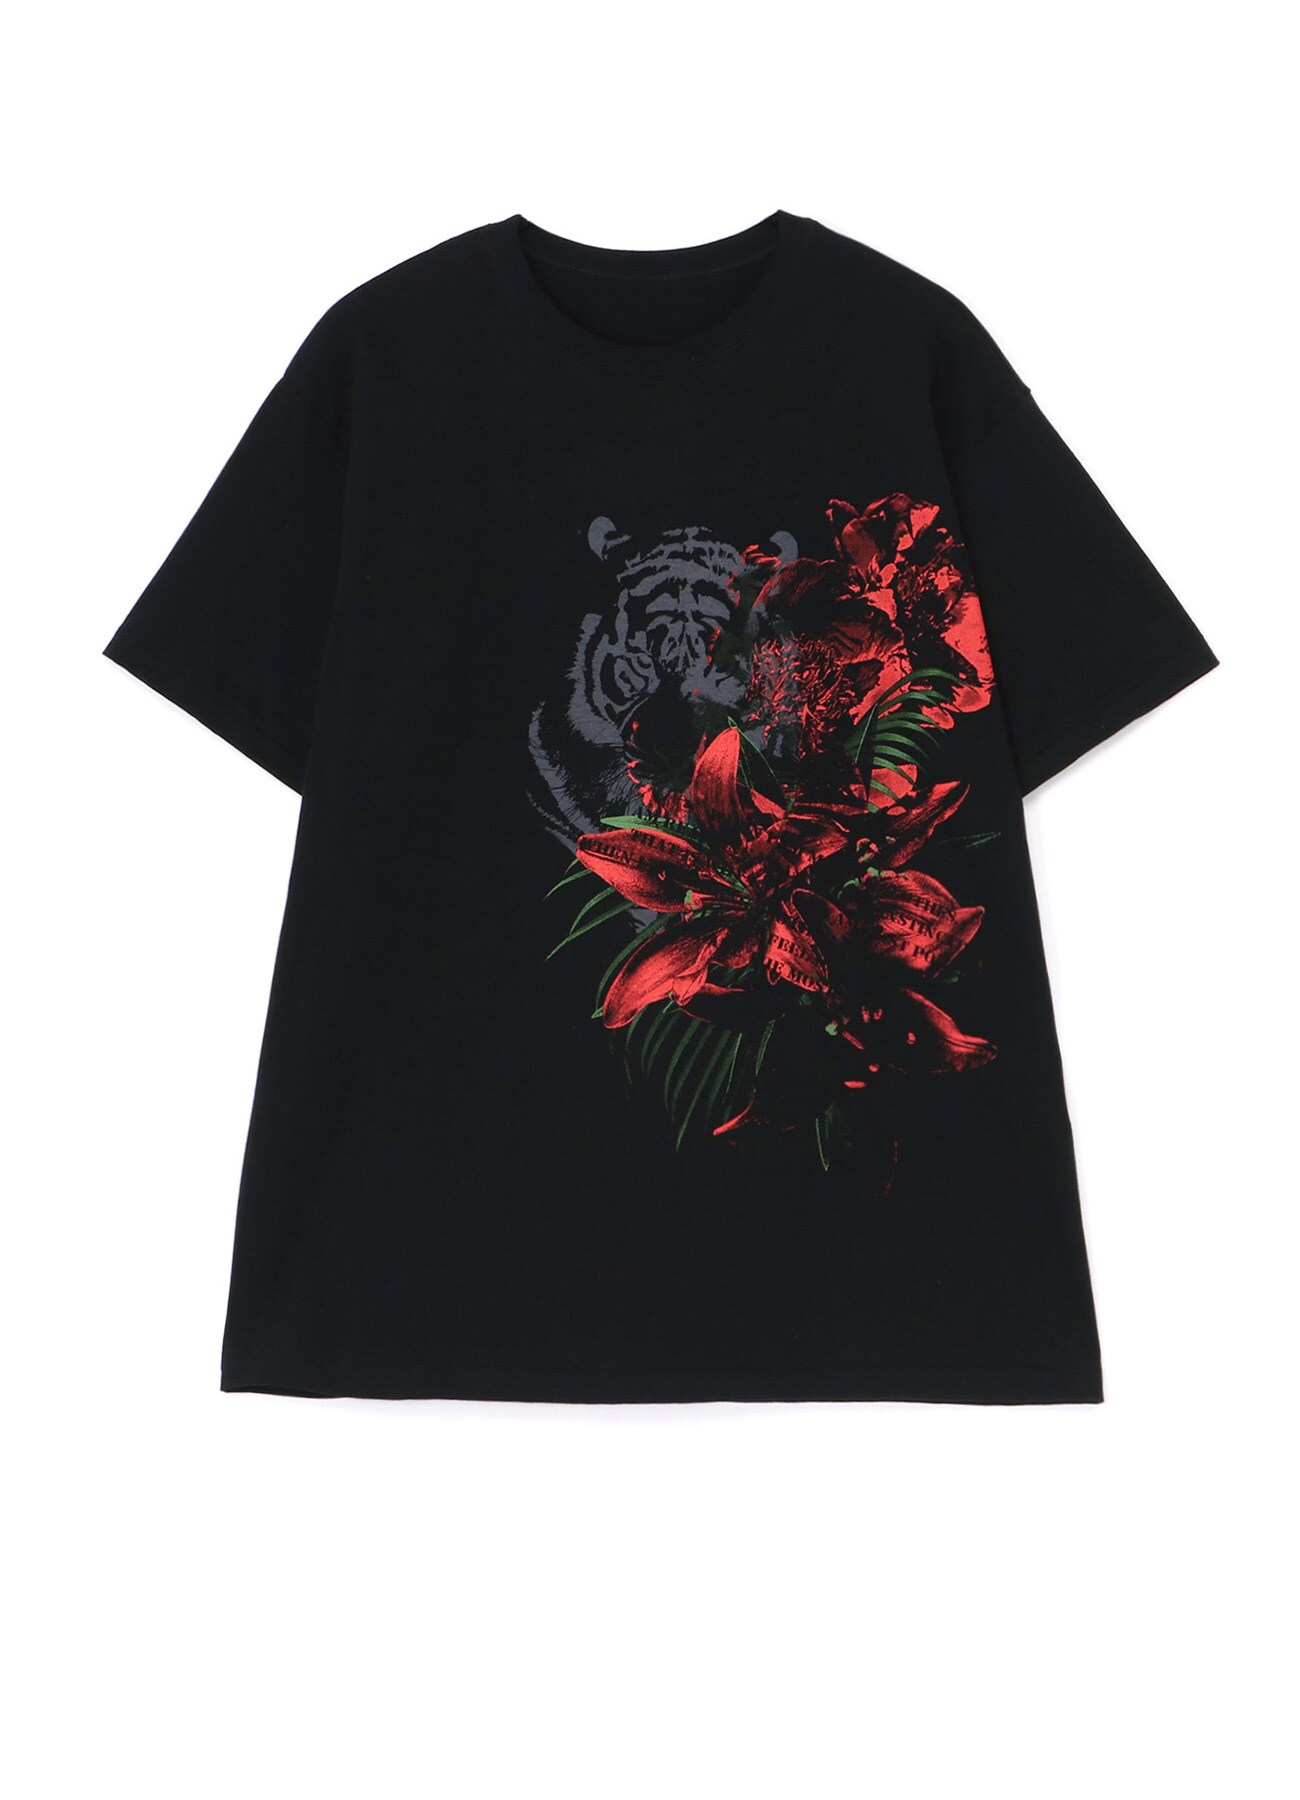 COTTON JERSEY TIGER AND FLOWER PRINT T-SHIRT